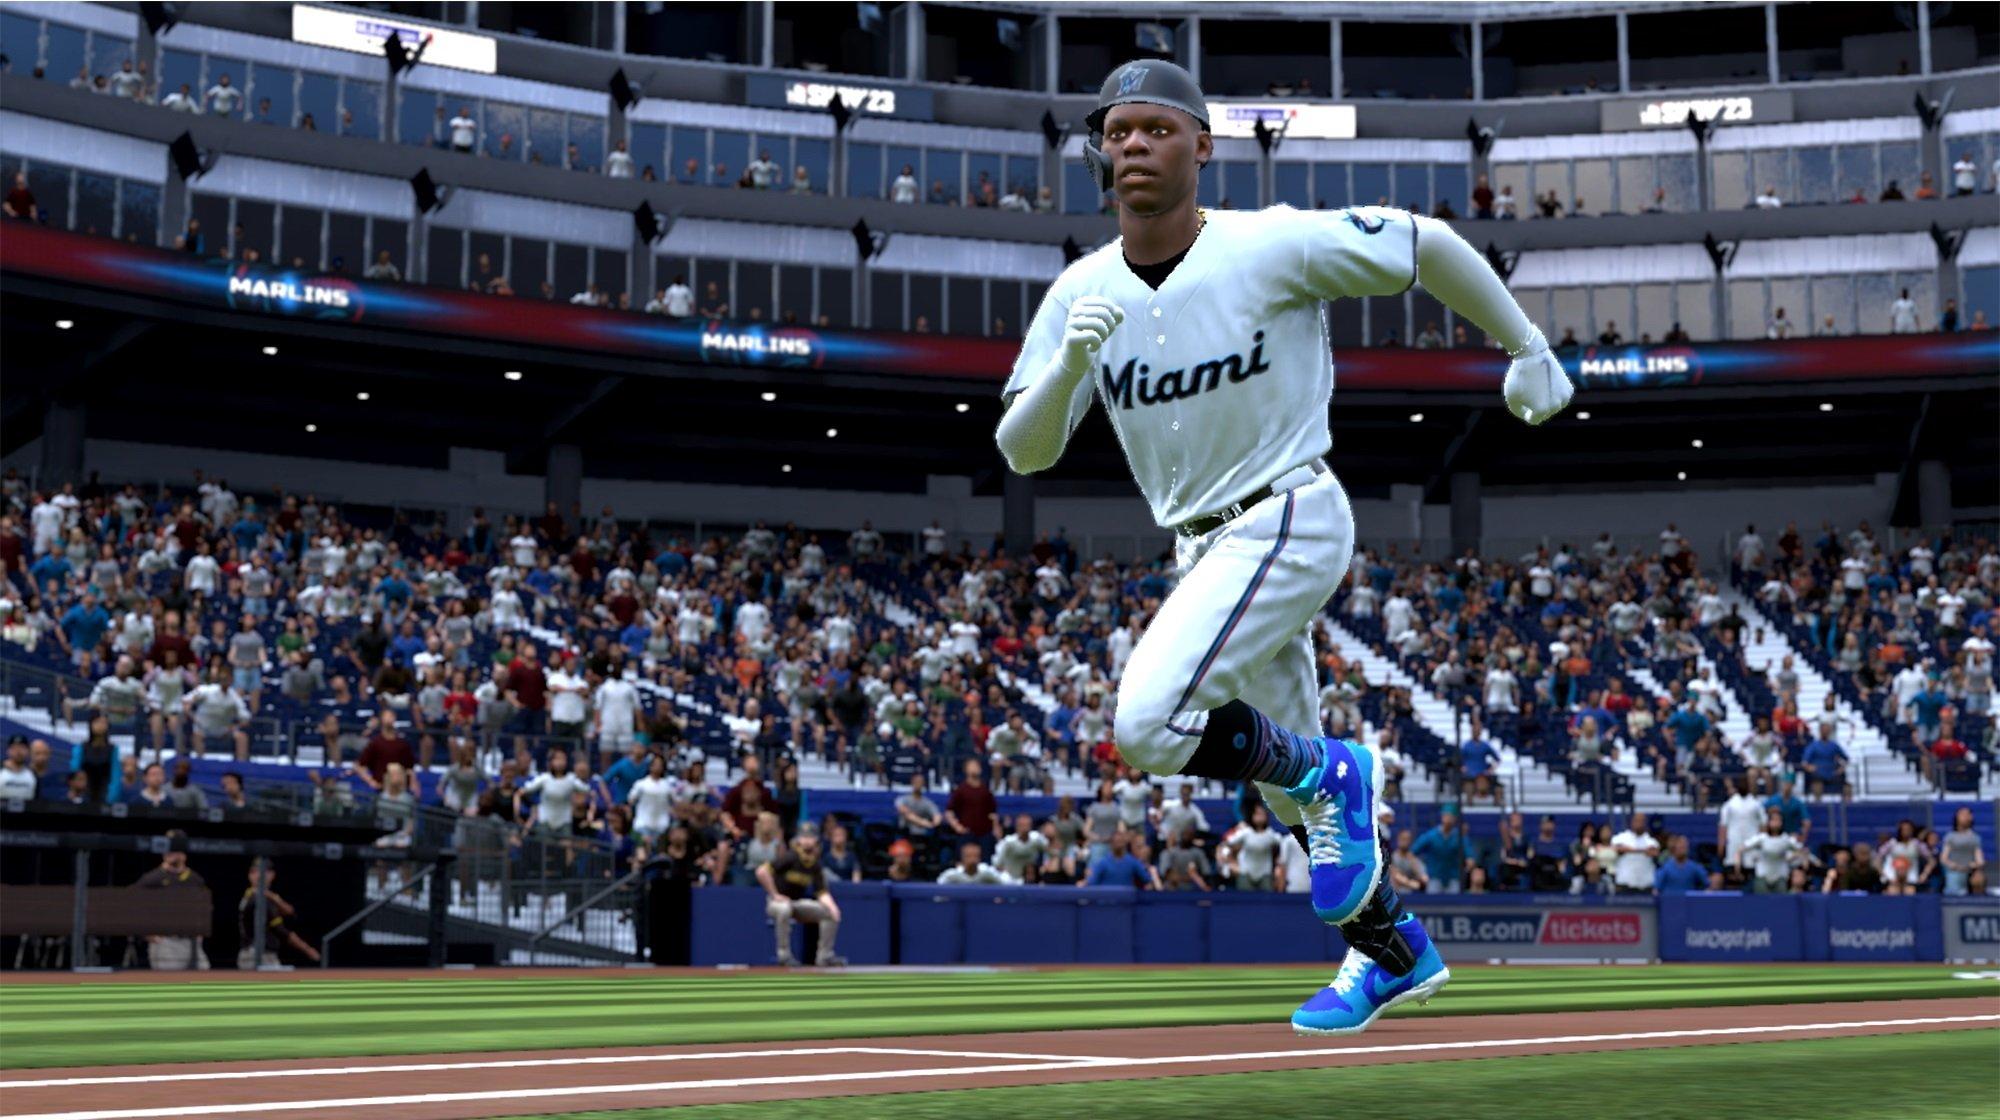 MLB The Show 23 Review: A Wonderful Celebration of Baseball's Past & Present